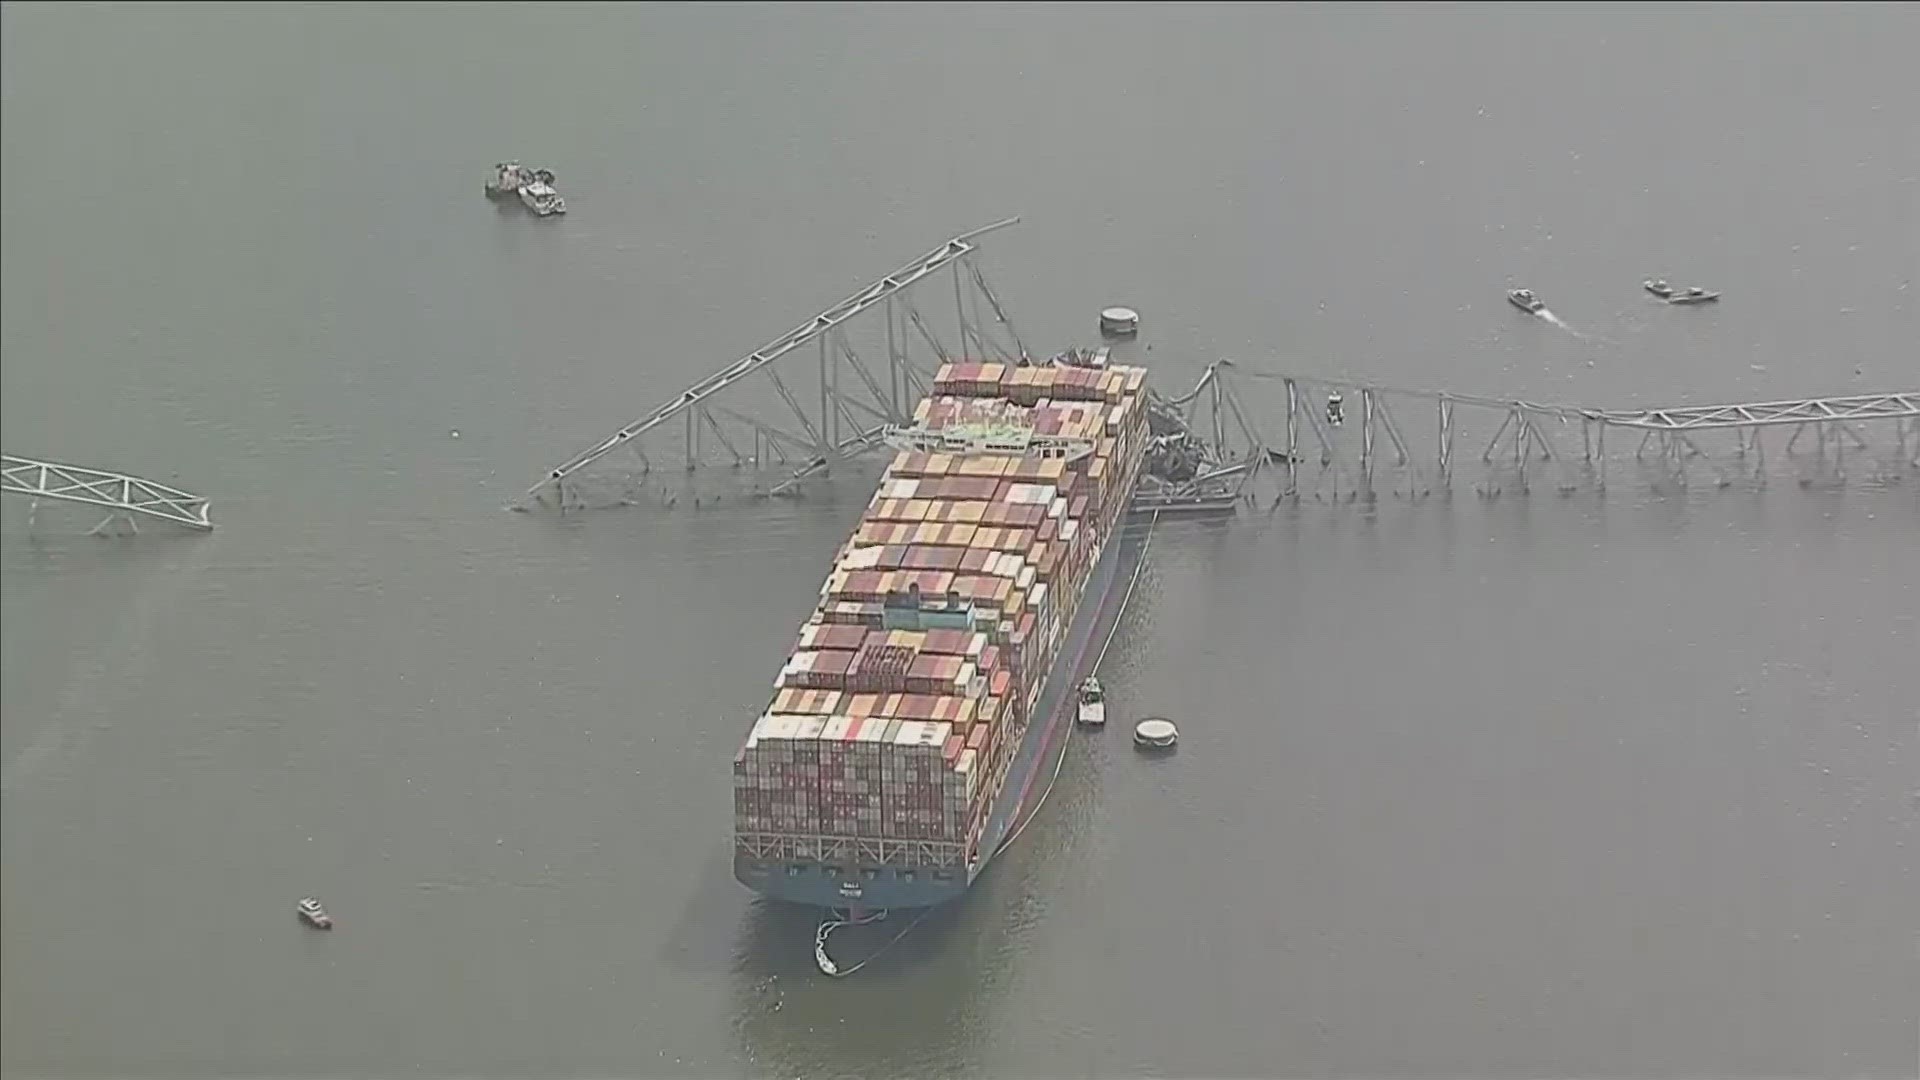 The search and rescue efforts are still underway after a cargo ship rammed into Baltimore's Francis Scott Key Bridge on Tuesday. Six people are missing.